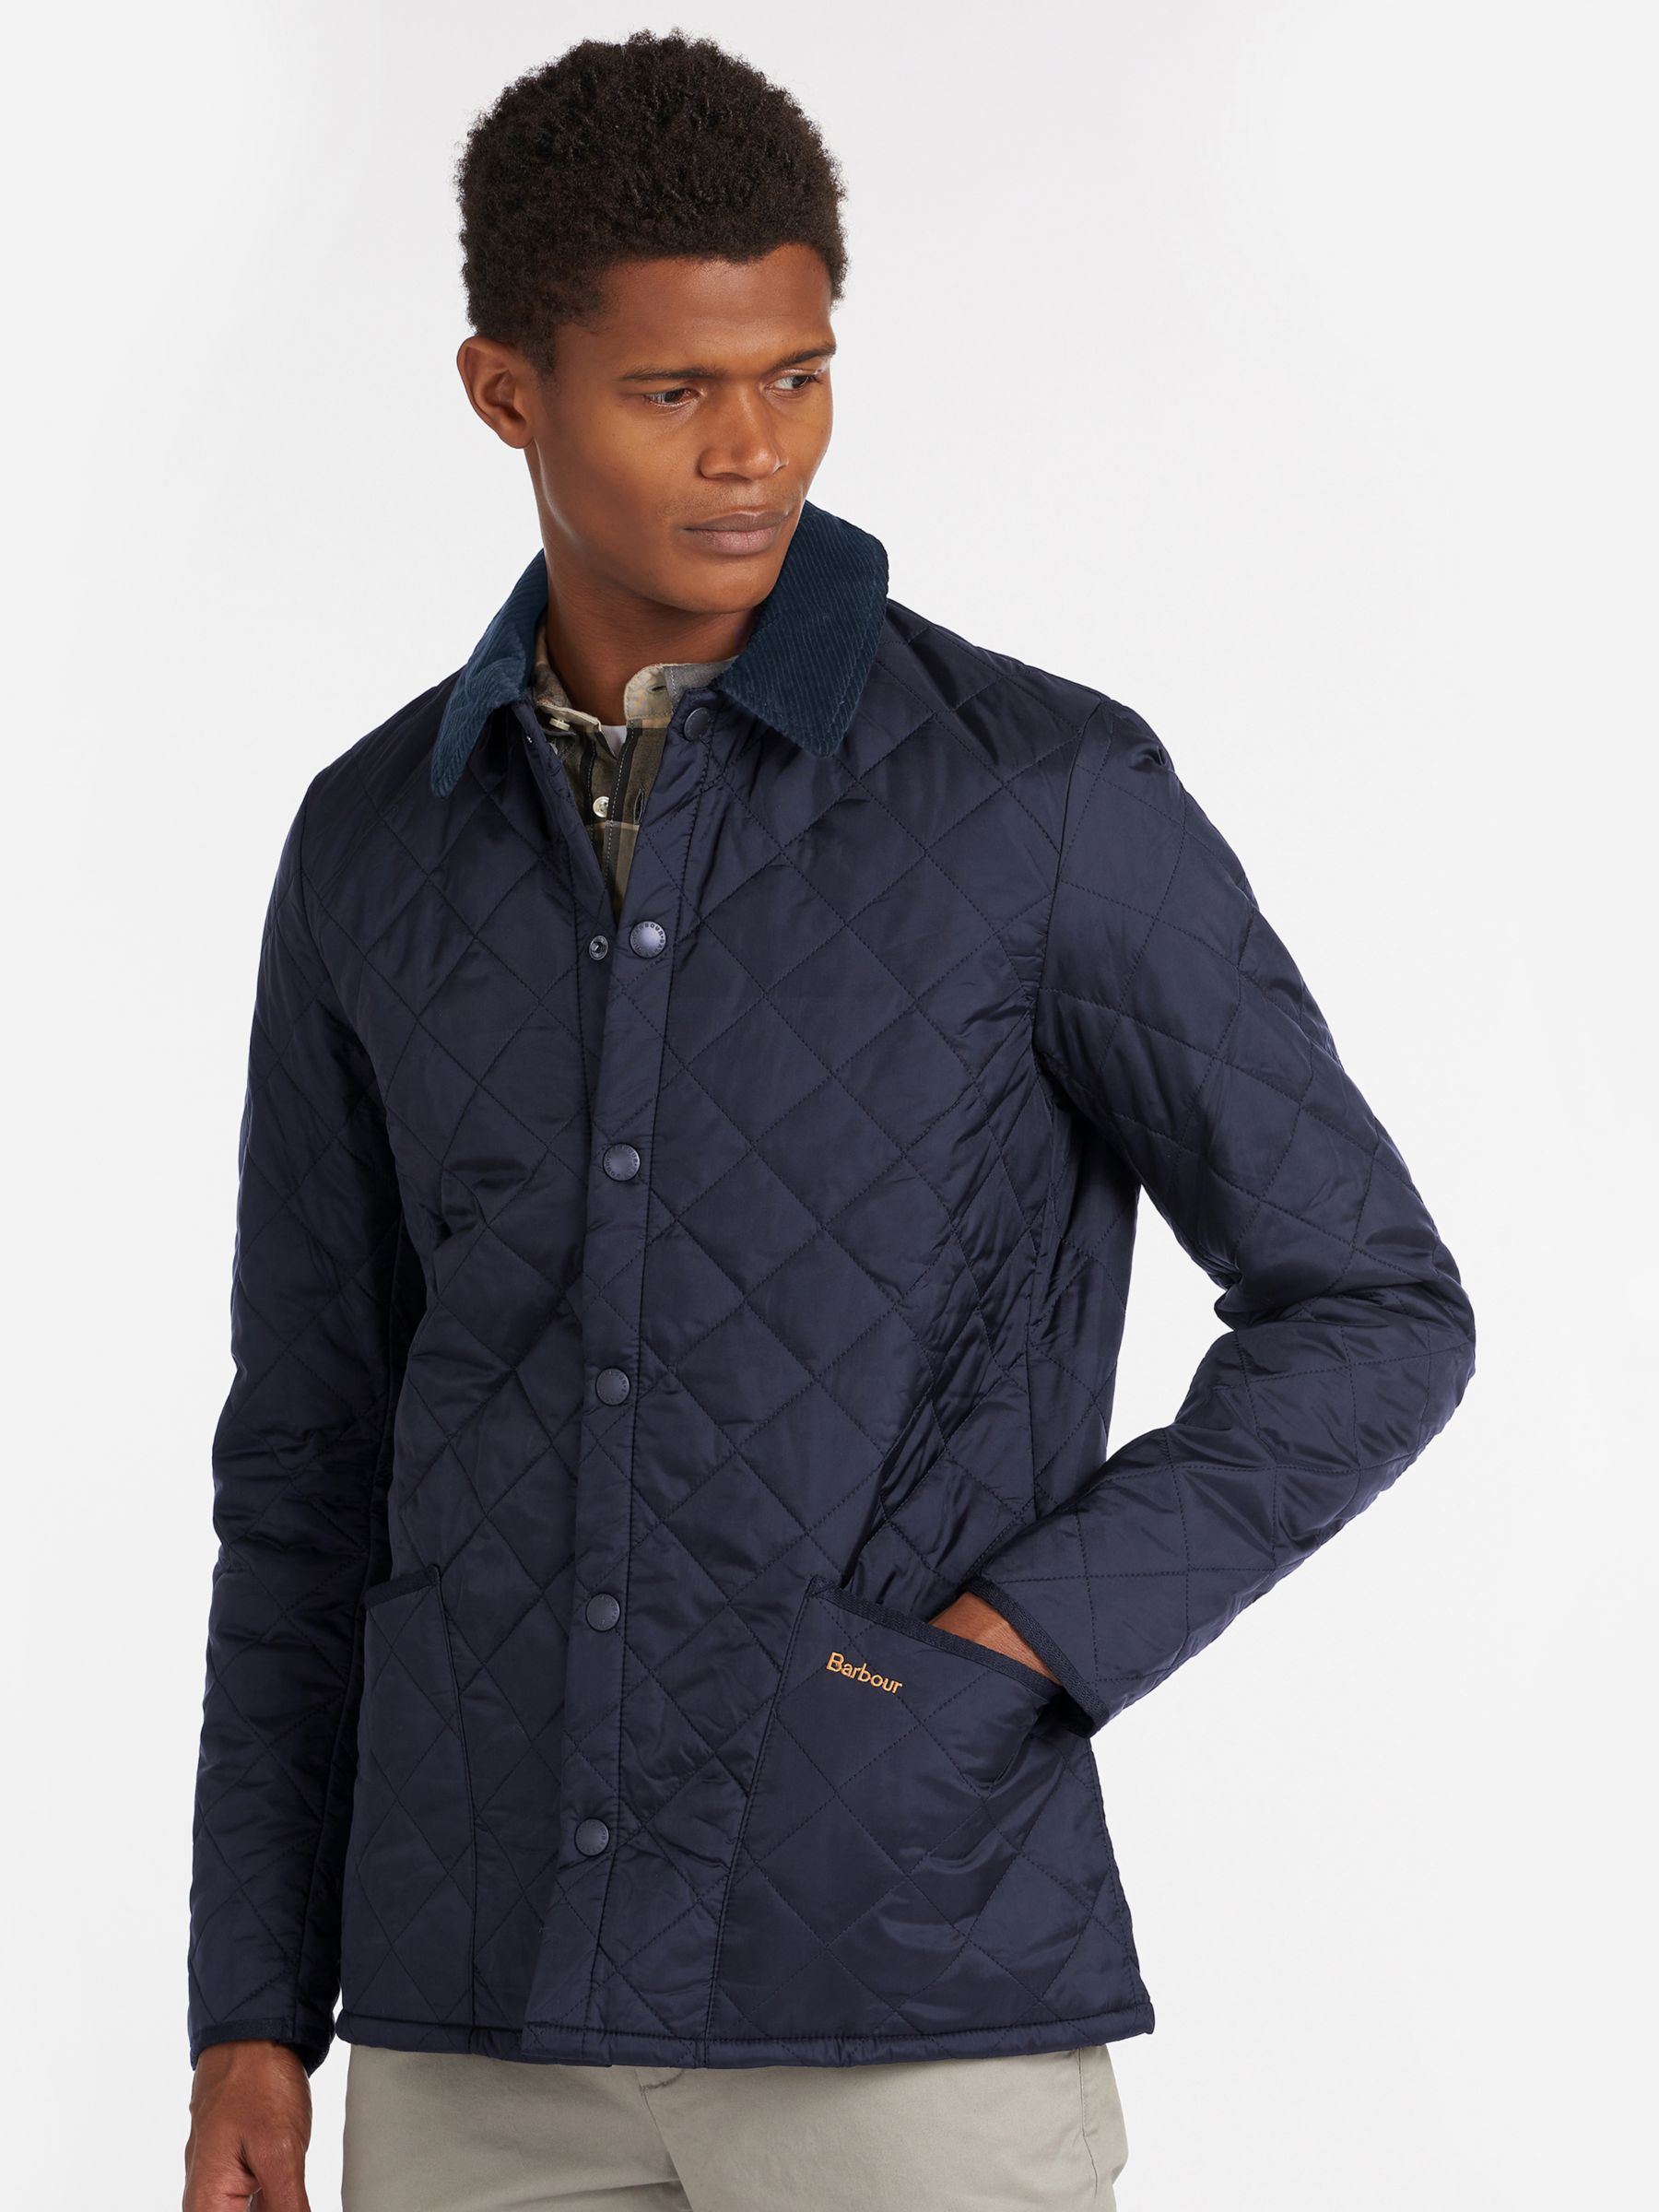 Barbour Heritage Liddesdale Quilted Jacket, Navy, S